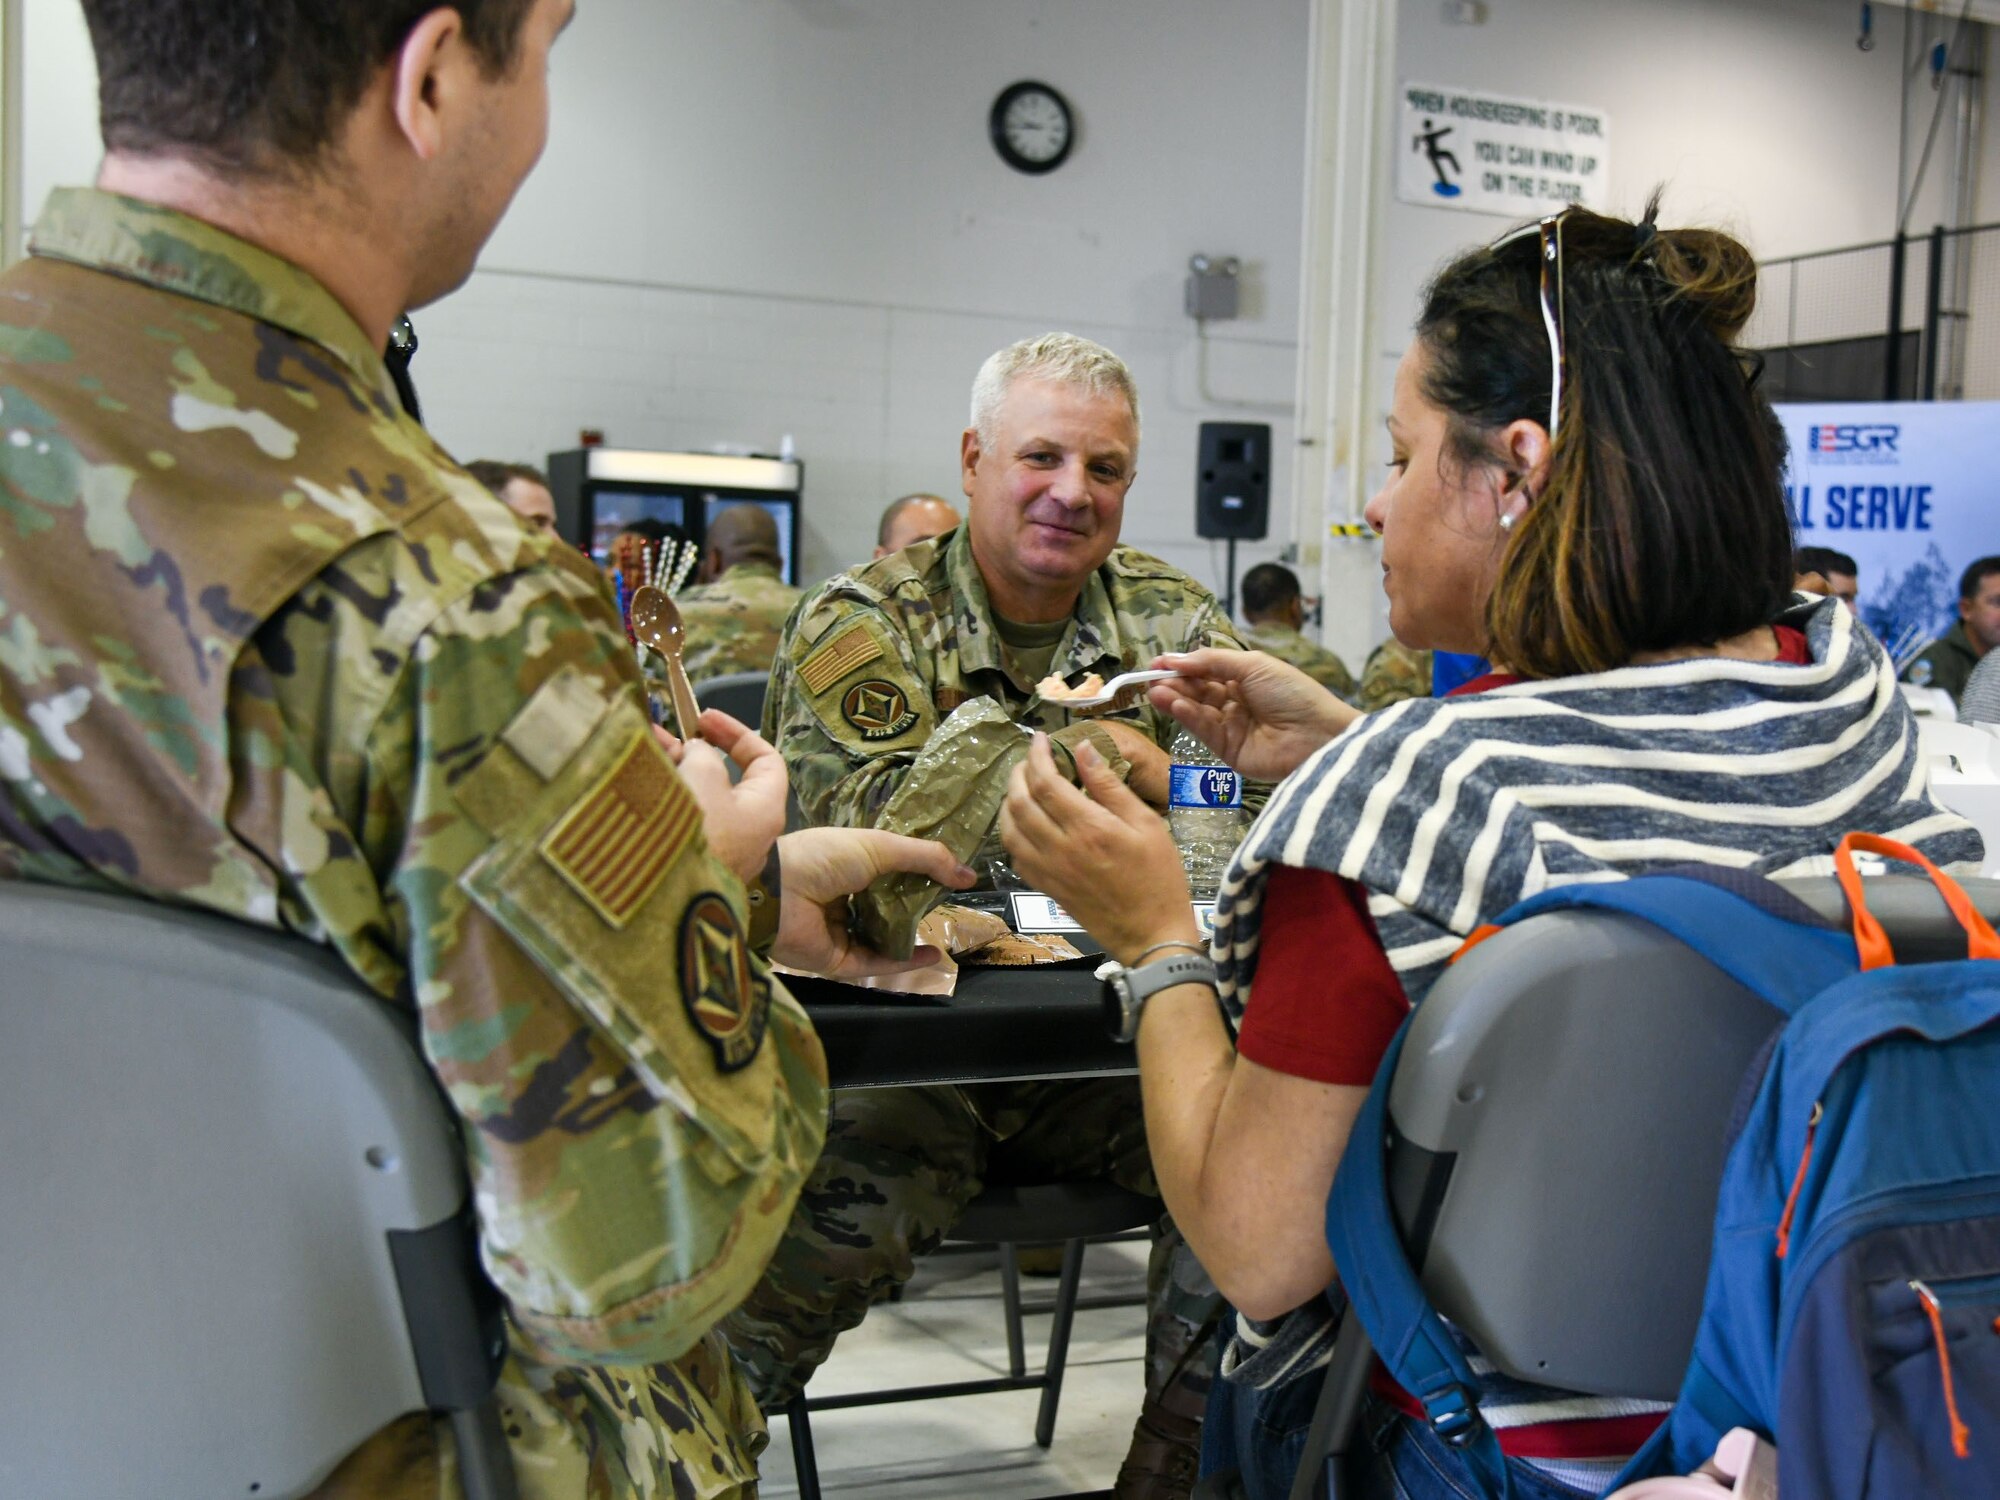 Patricia Isherwood takes out contents from a Meal, Ready-to-Eat, during Employer Day on Dover Air Force Base, Delaware, June 3, 2023. MRE’s were distributed to employers to taste, and to provide insight on what military members eat while in combat or field conditions. (U.S. Air Force photo by Senior Airman Shayna Hodge)